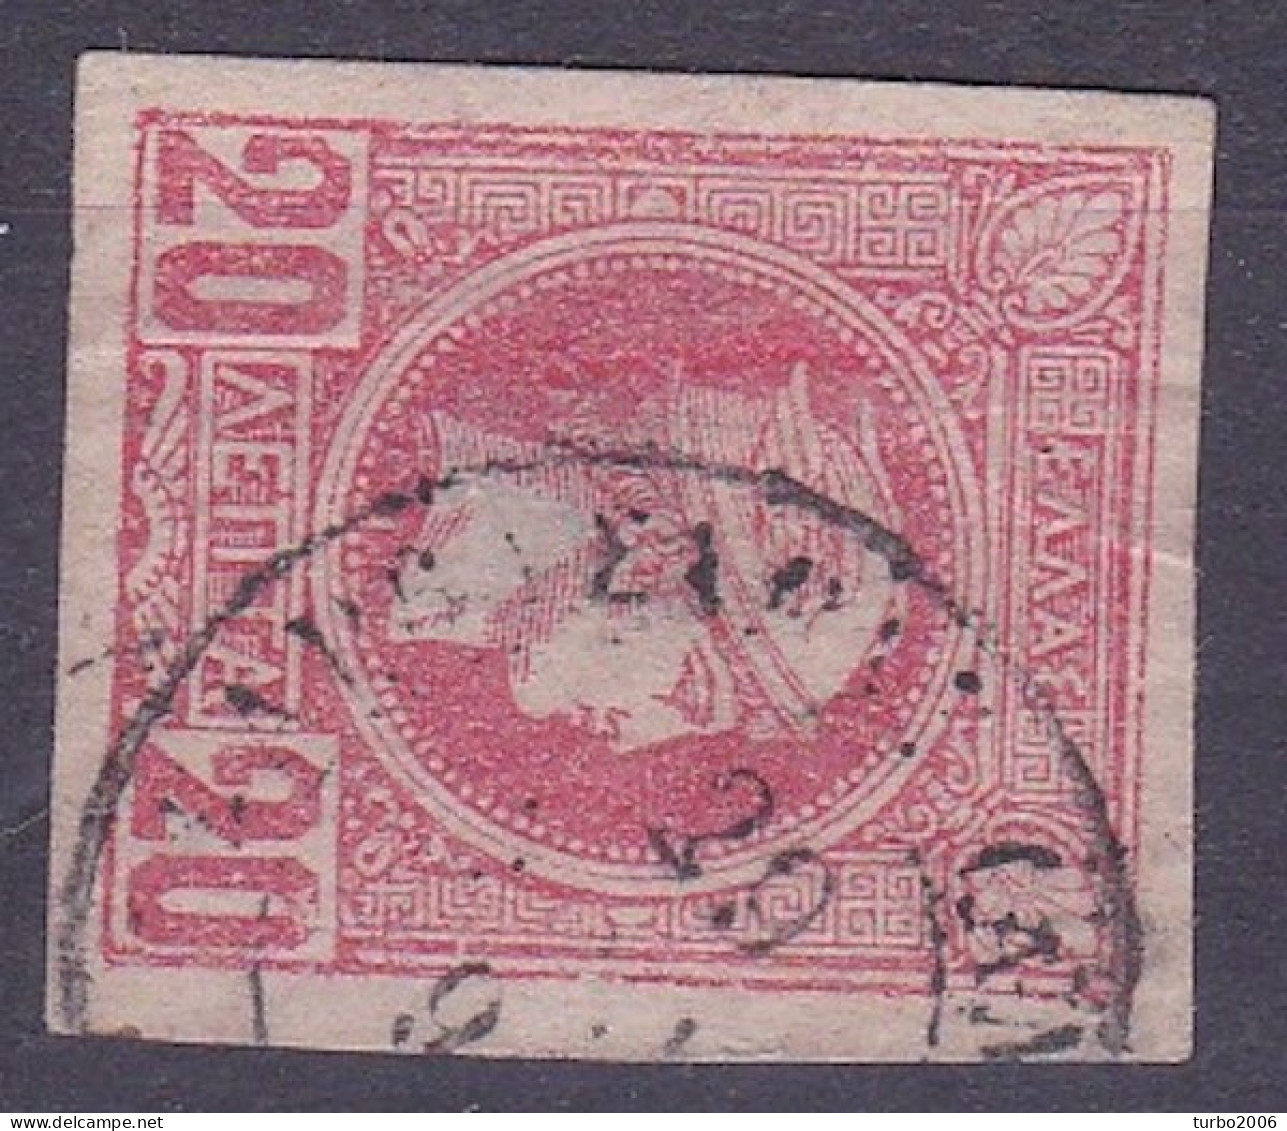 GREECE Cancellation ΚΑΡΒΑΣΑΡΑΣ (ΑΜΦ.ΑΡΓΟΣ) Type III On 1897-1900 Small Hermes Head 20 L Red Vl. 121 B - Used Stamps